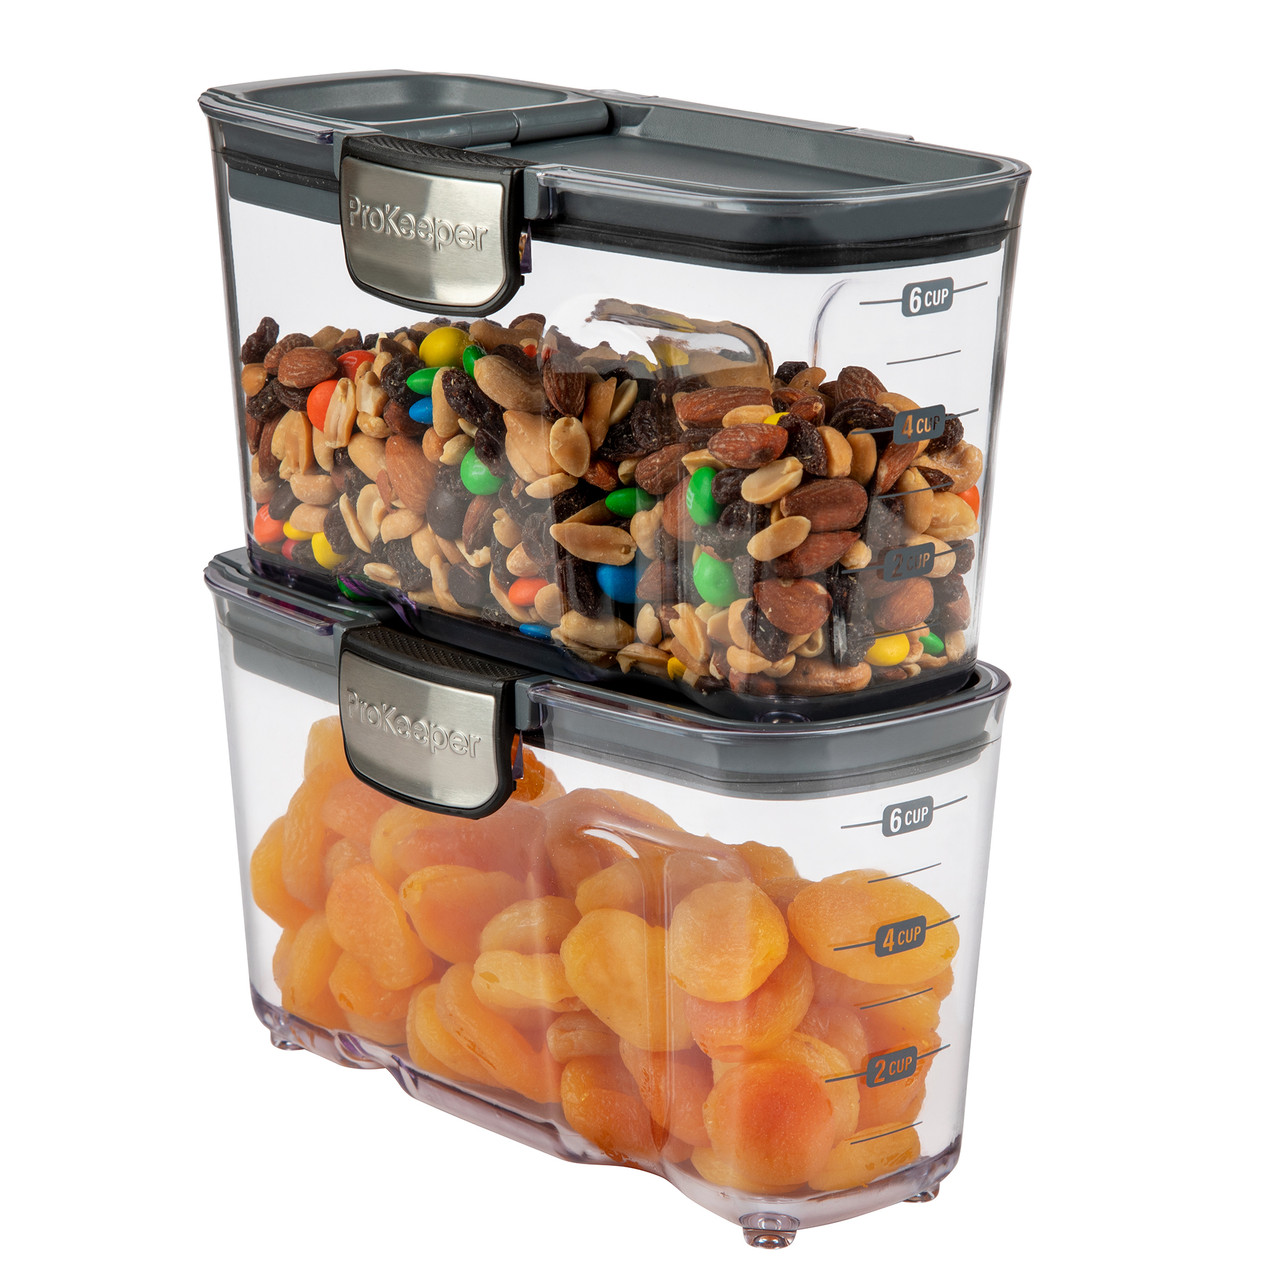 Prokeeper+ Cereal Storage Container - King Arthur Baking Company